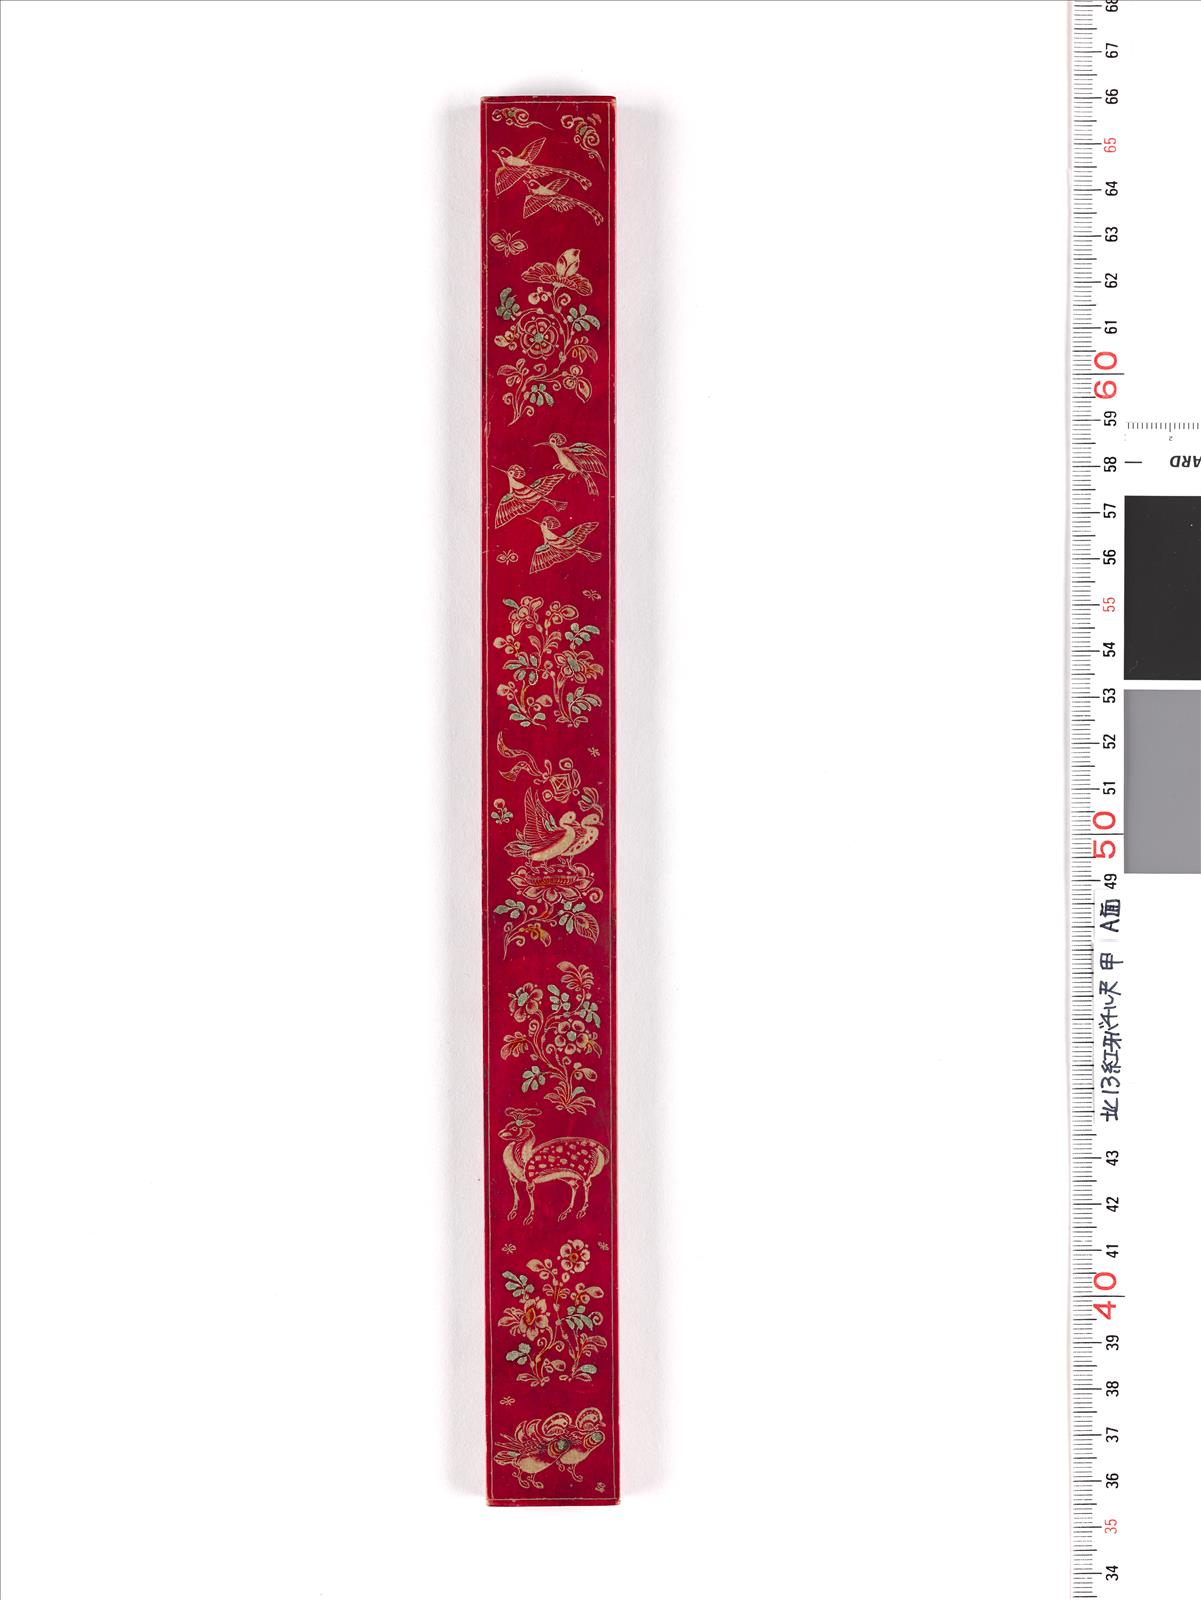 Red-stained ivory |shaku| ruler with |bachiru| decoration, (甲 